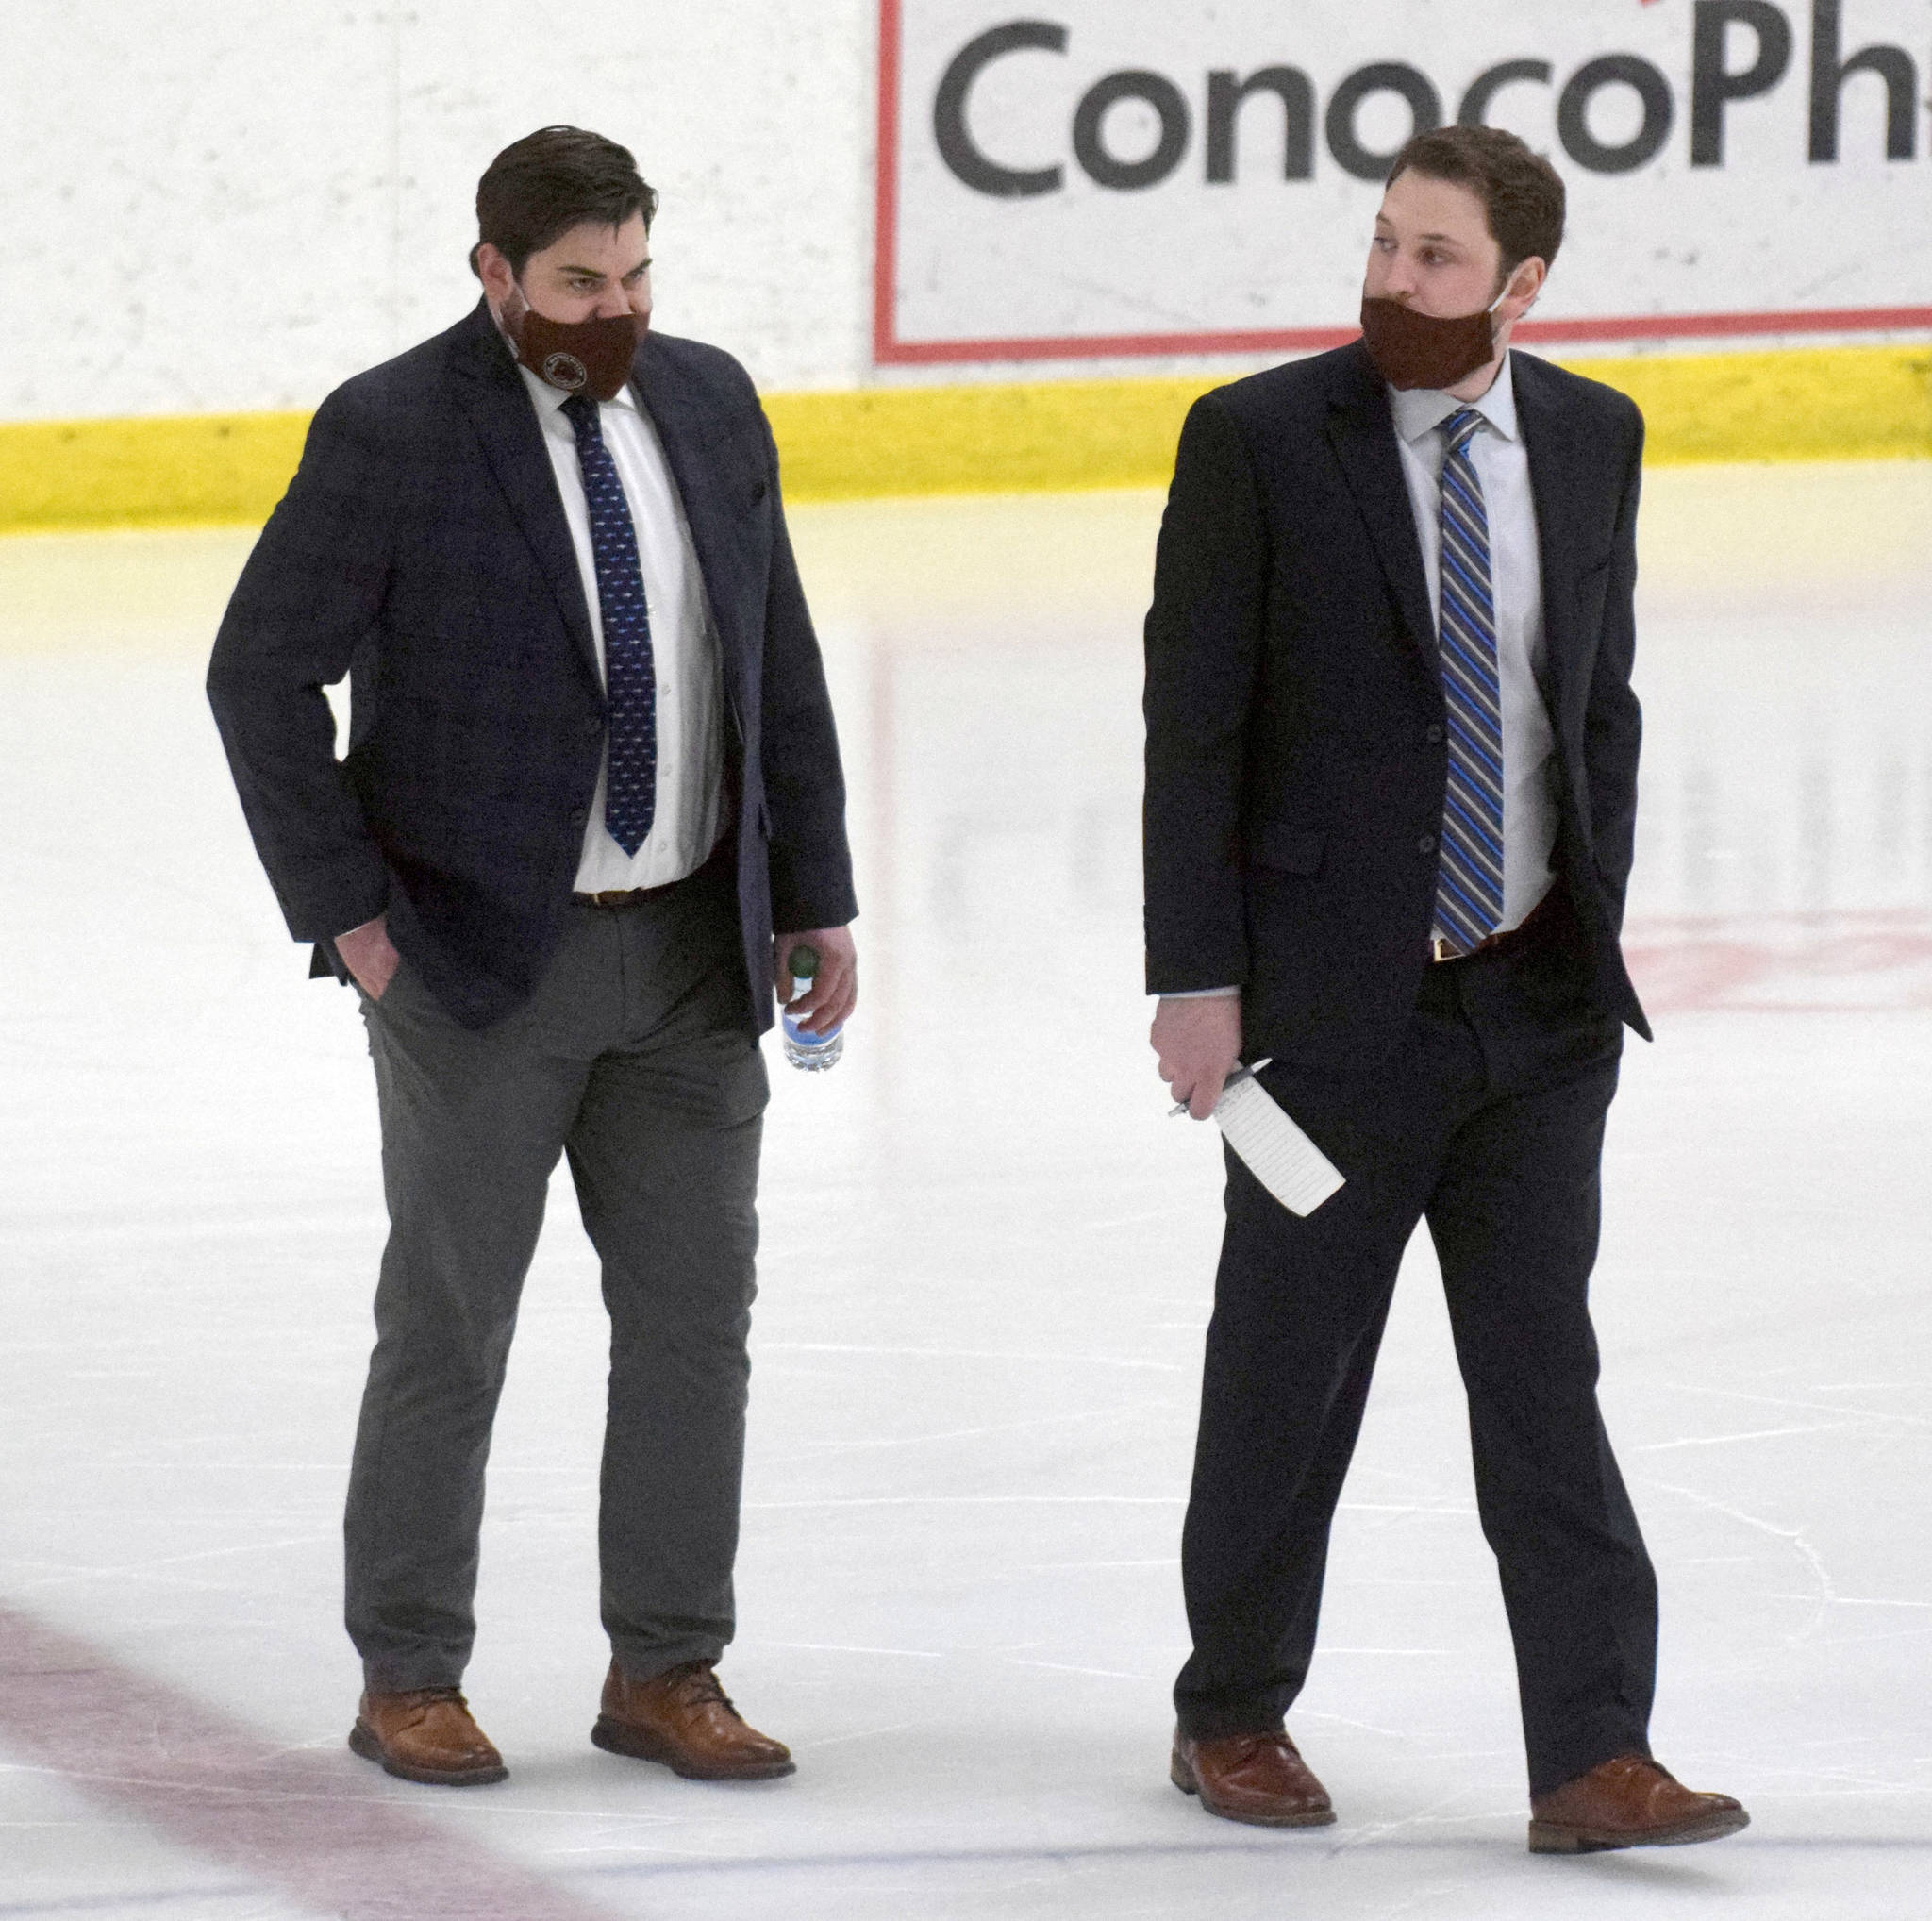 Former Kenai River Brown Bears head coach Kevin Murdock and new head coach Josh Dubinsky take to the ice Friday, April 23, 2021, against the Chippewa (Wisconsin) Steel at the Soldotna Regional Sports Complex in Soldotna, Alaska. (Photo by Jeff Helminiak/Peninsula Clarion)